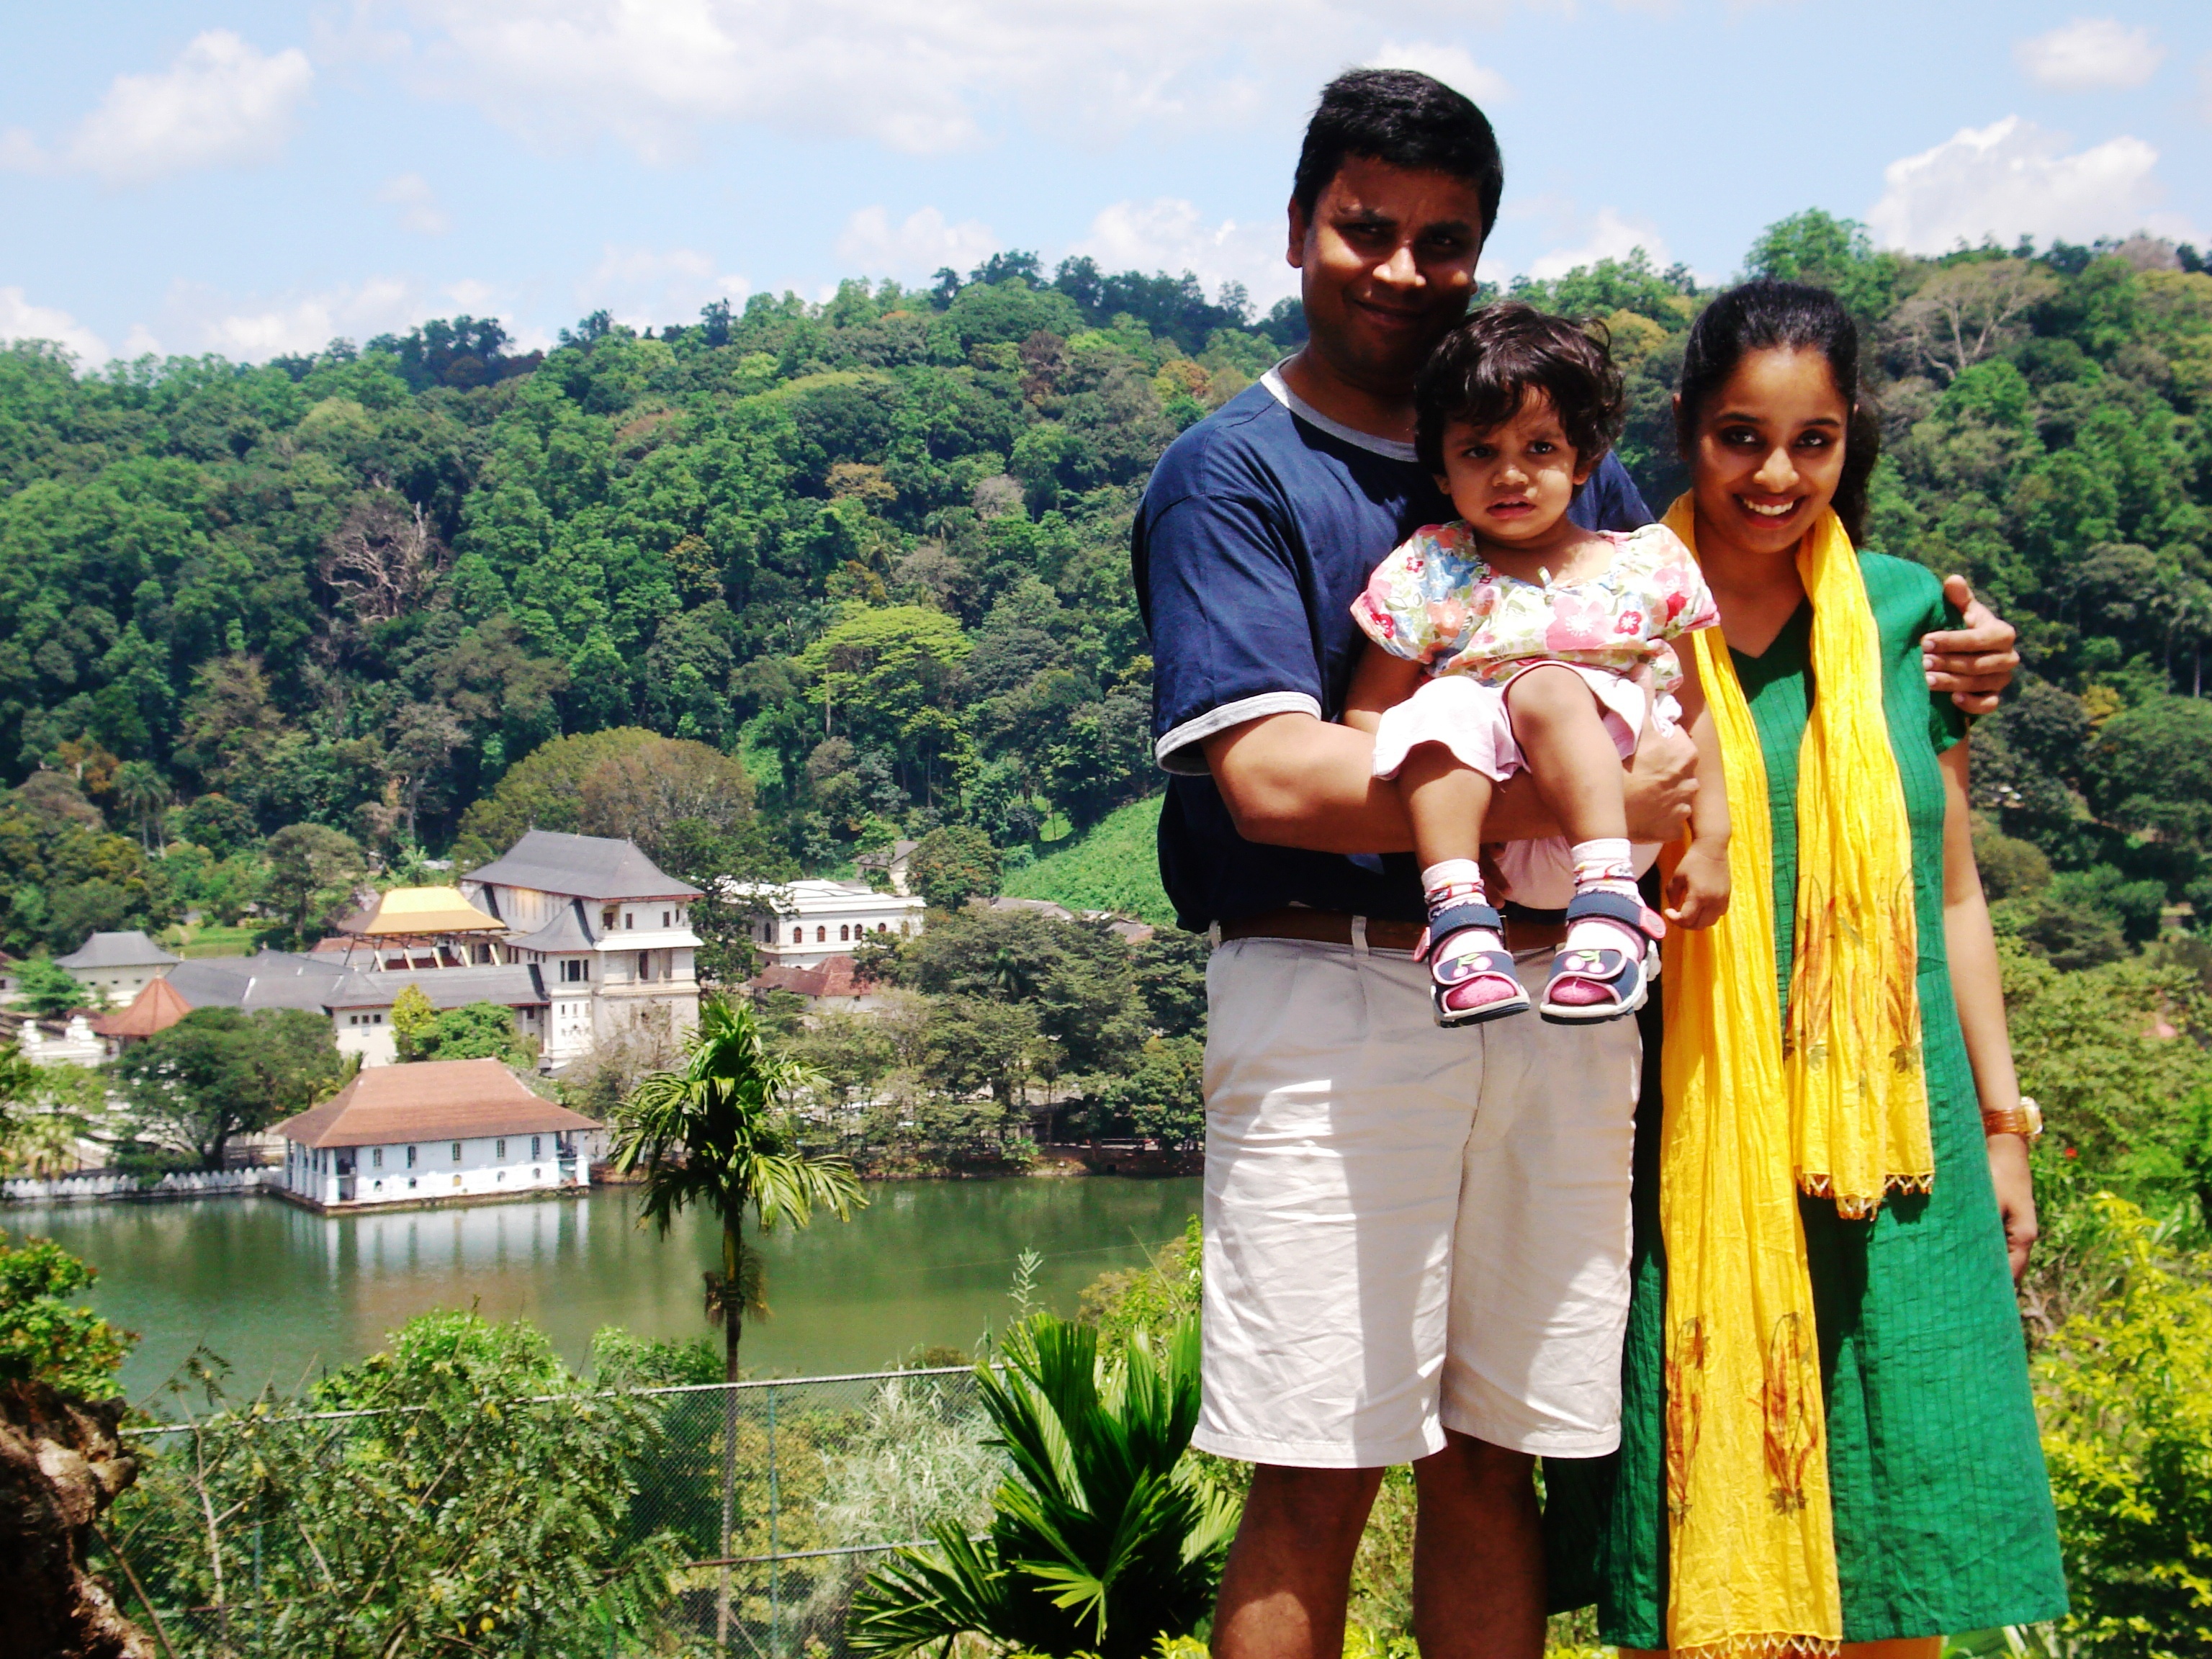 Kandy Lake and the Royal Palace of Kandy in the Background